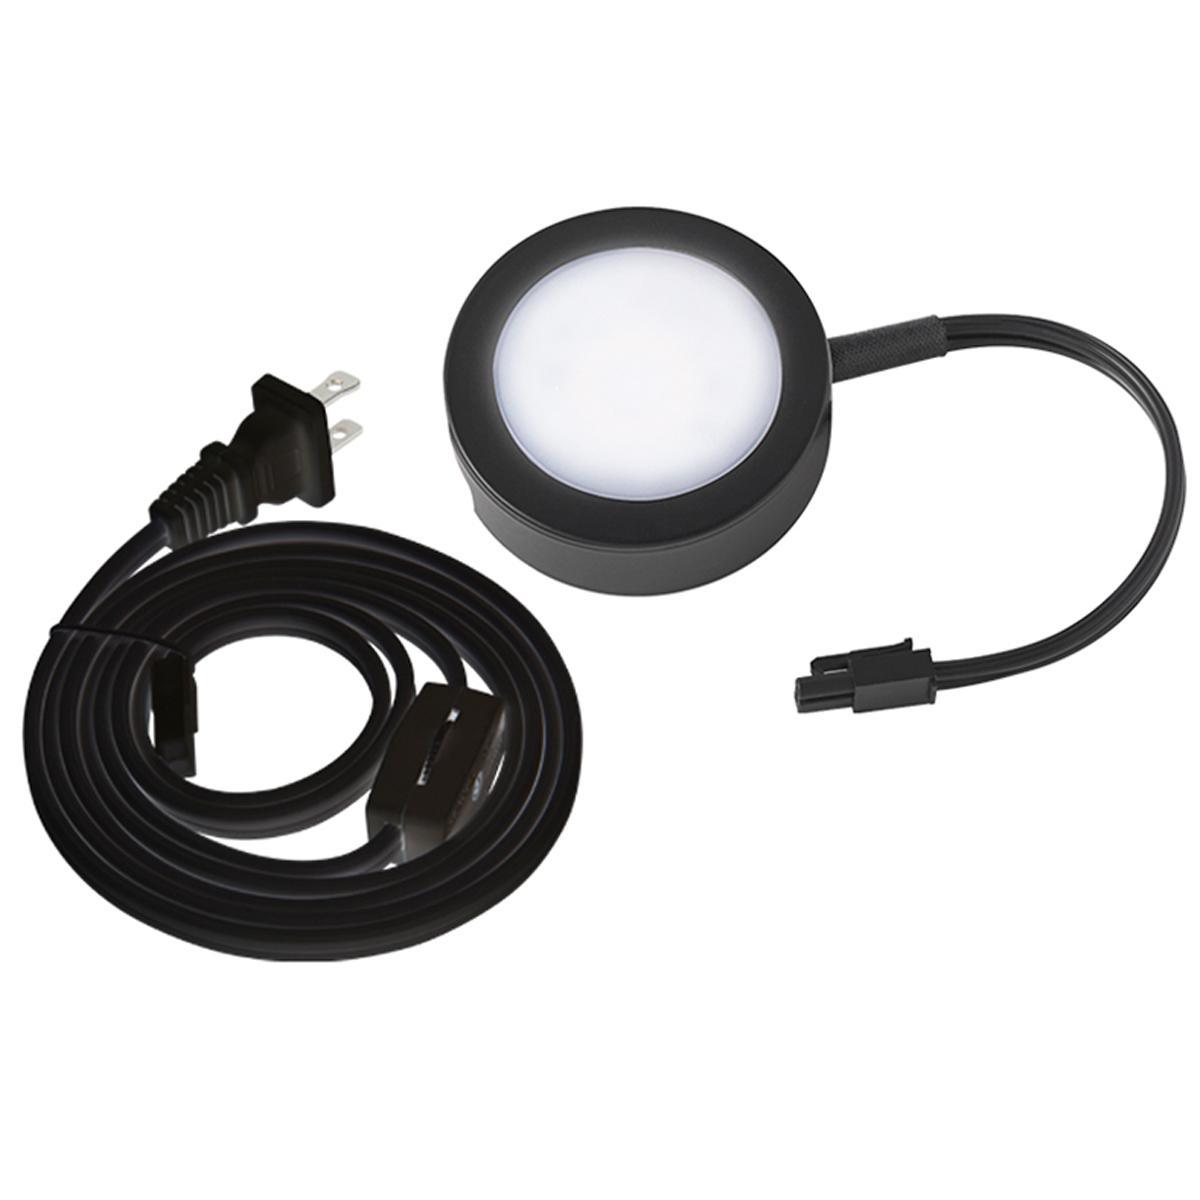 3-CCT LED Puck Light with Lead Wire and Power Cord, 3" Wide, 27K/30K/35K, 120V